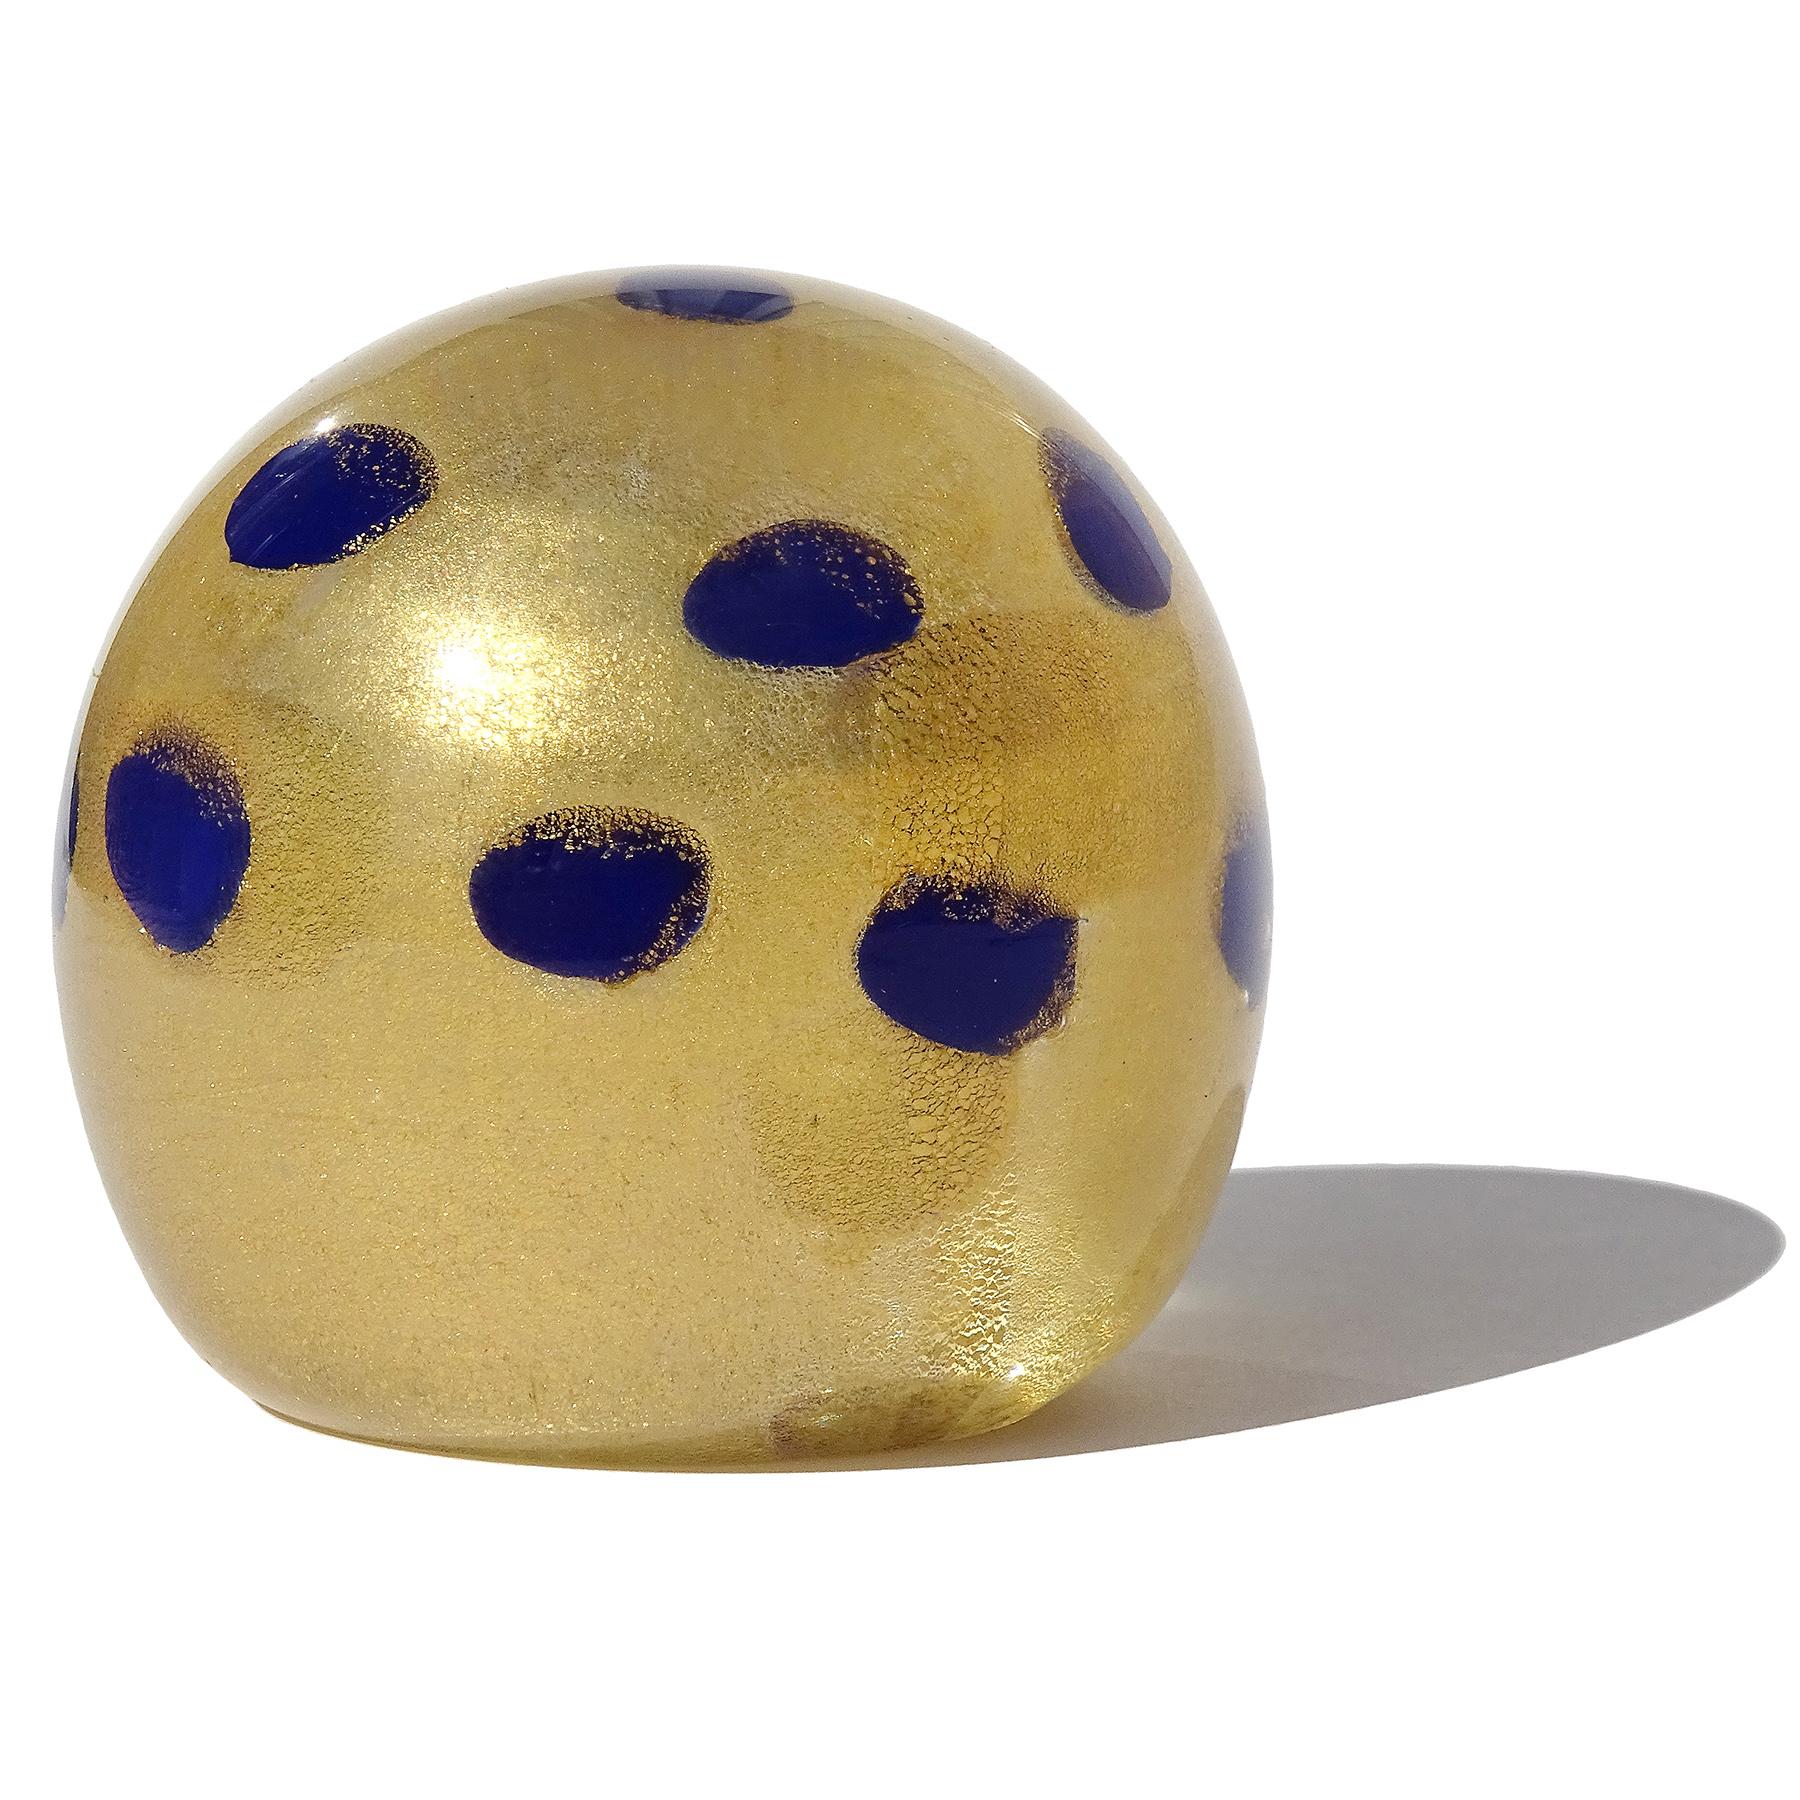 Beautiful small vintage Murano hand blown dark cobalt blue and gold flecks Italian art glass paperweight. Documented to the Barovier e Toso company. The piece is profusely covered in heavy yellow gold leaf throughout, with spots decoration. Would